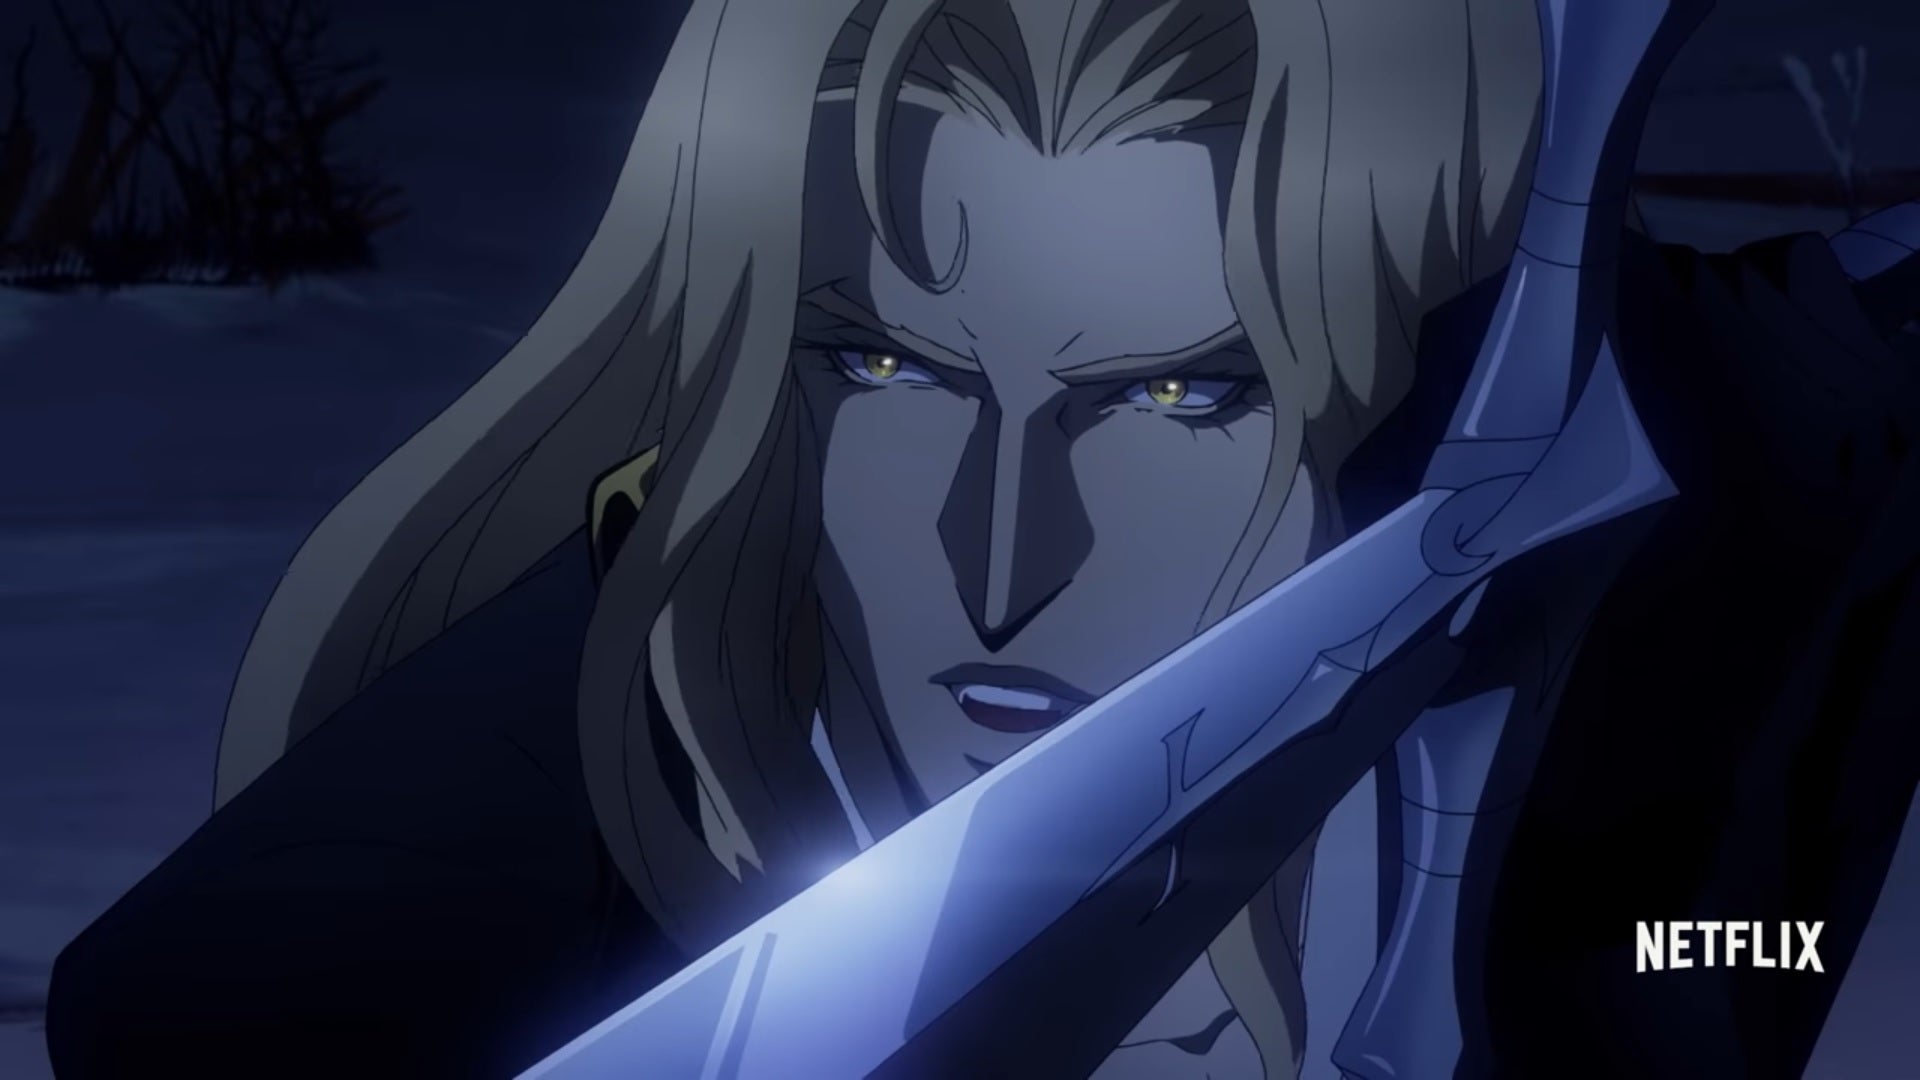 Image for Castlevania season 2 trailer shows off bloody monster-fighting action